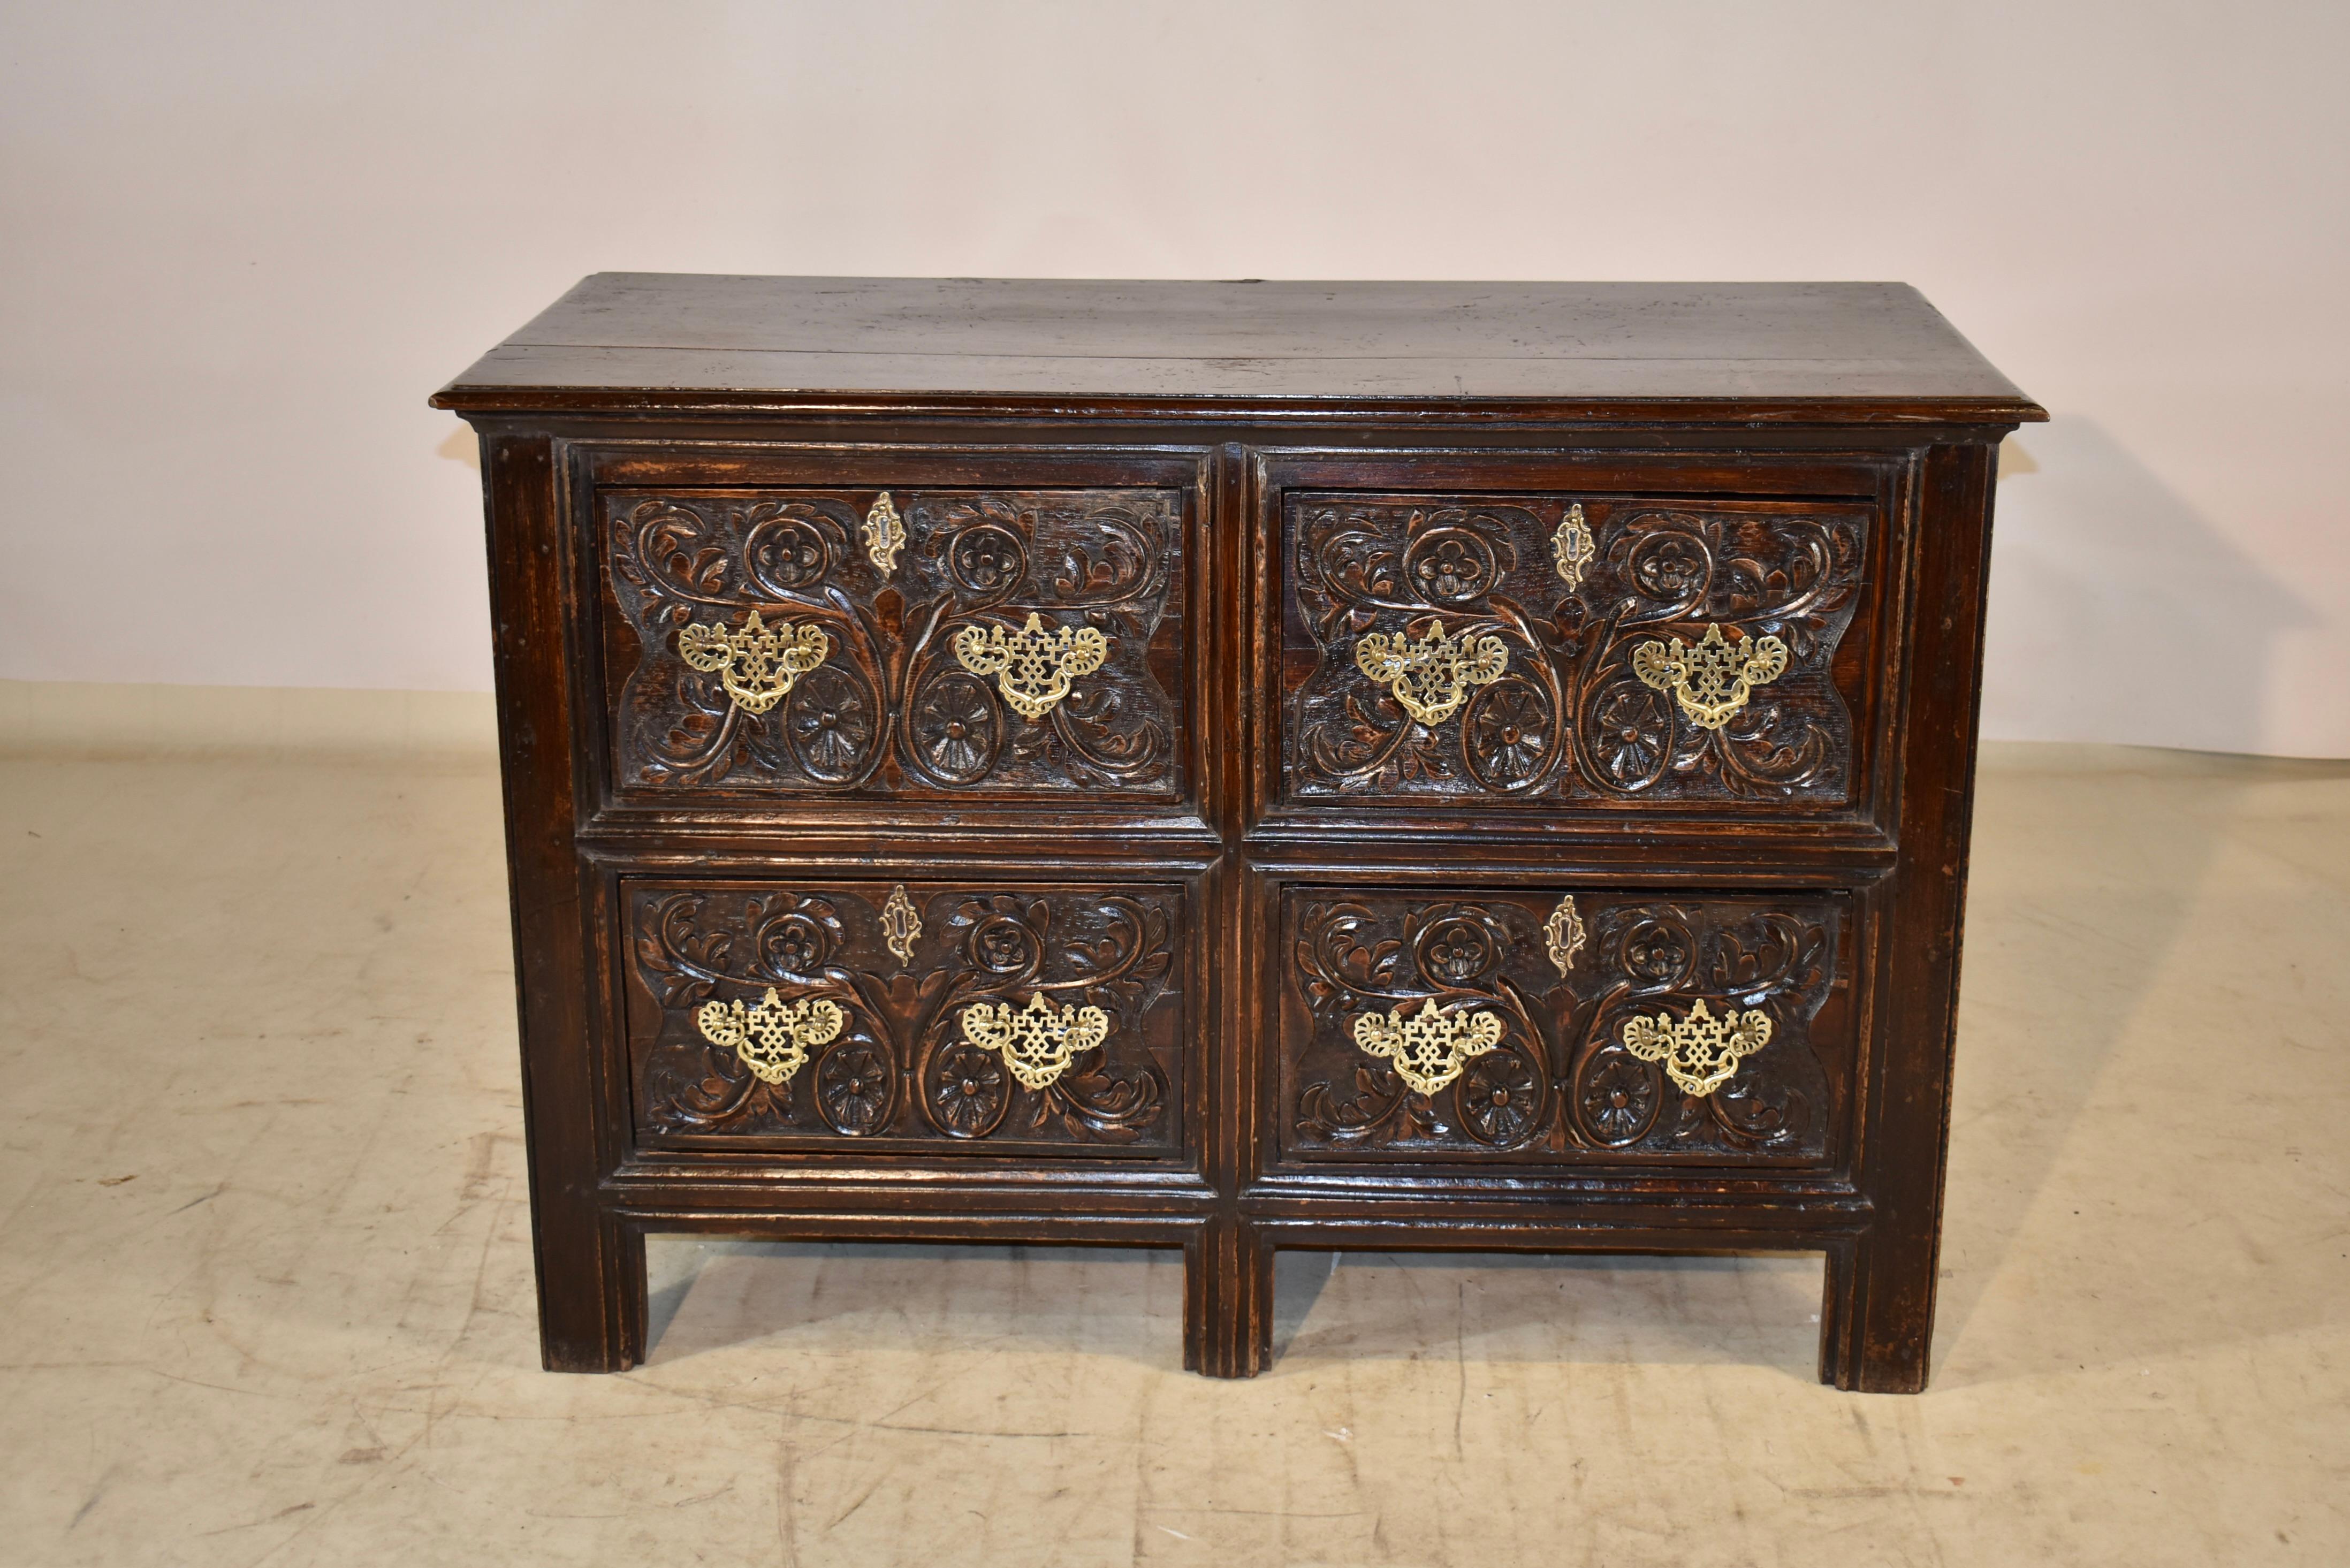 18th century Unusual English chest of drawers made from oak. The top has a beveled edge, and follows down to simple paneled sides, which add design interest from the side of the piece. the front contains four drawers, all with hand carved